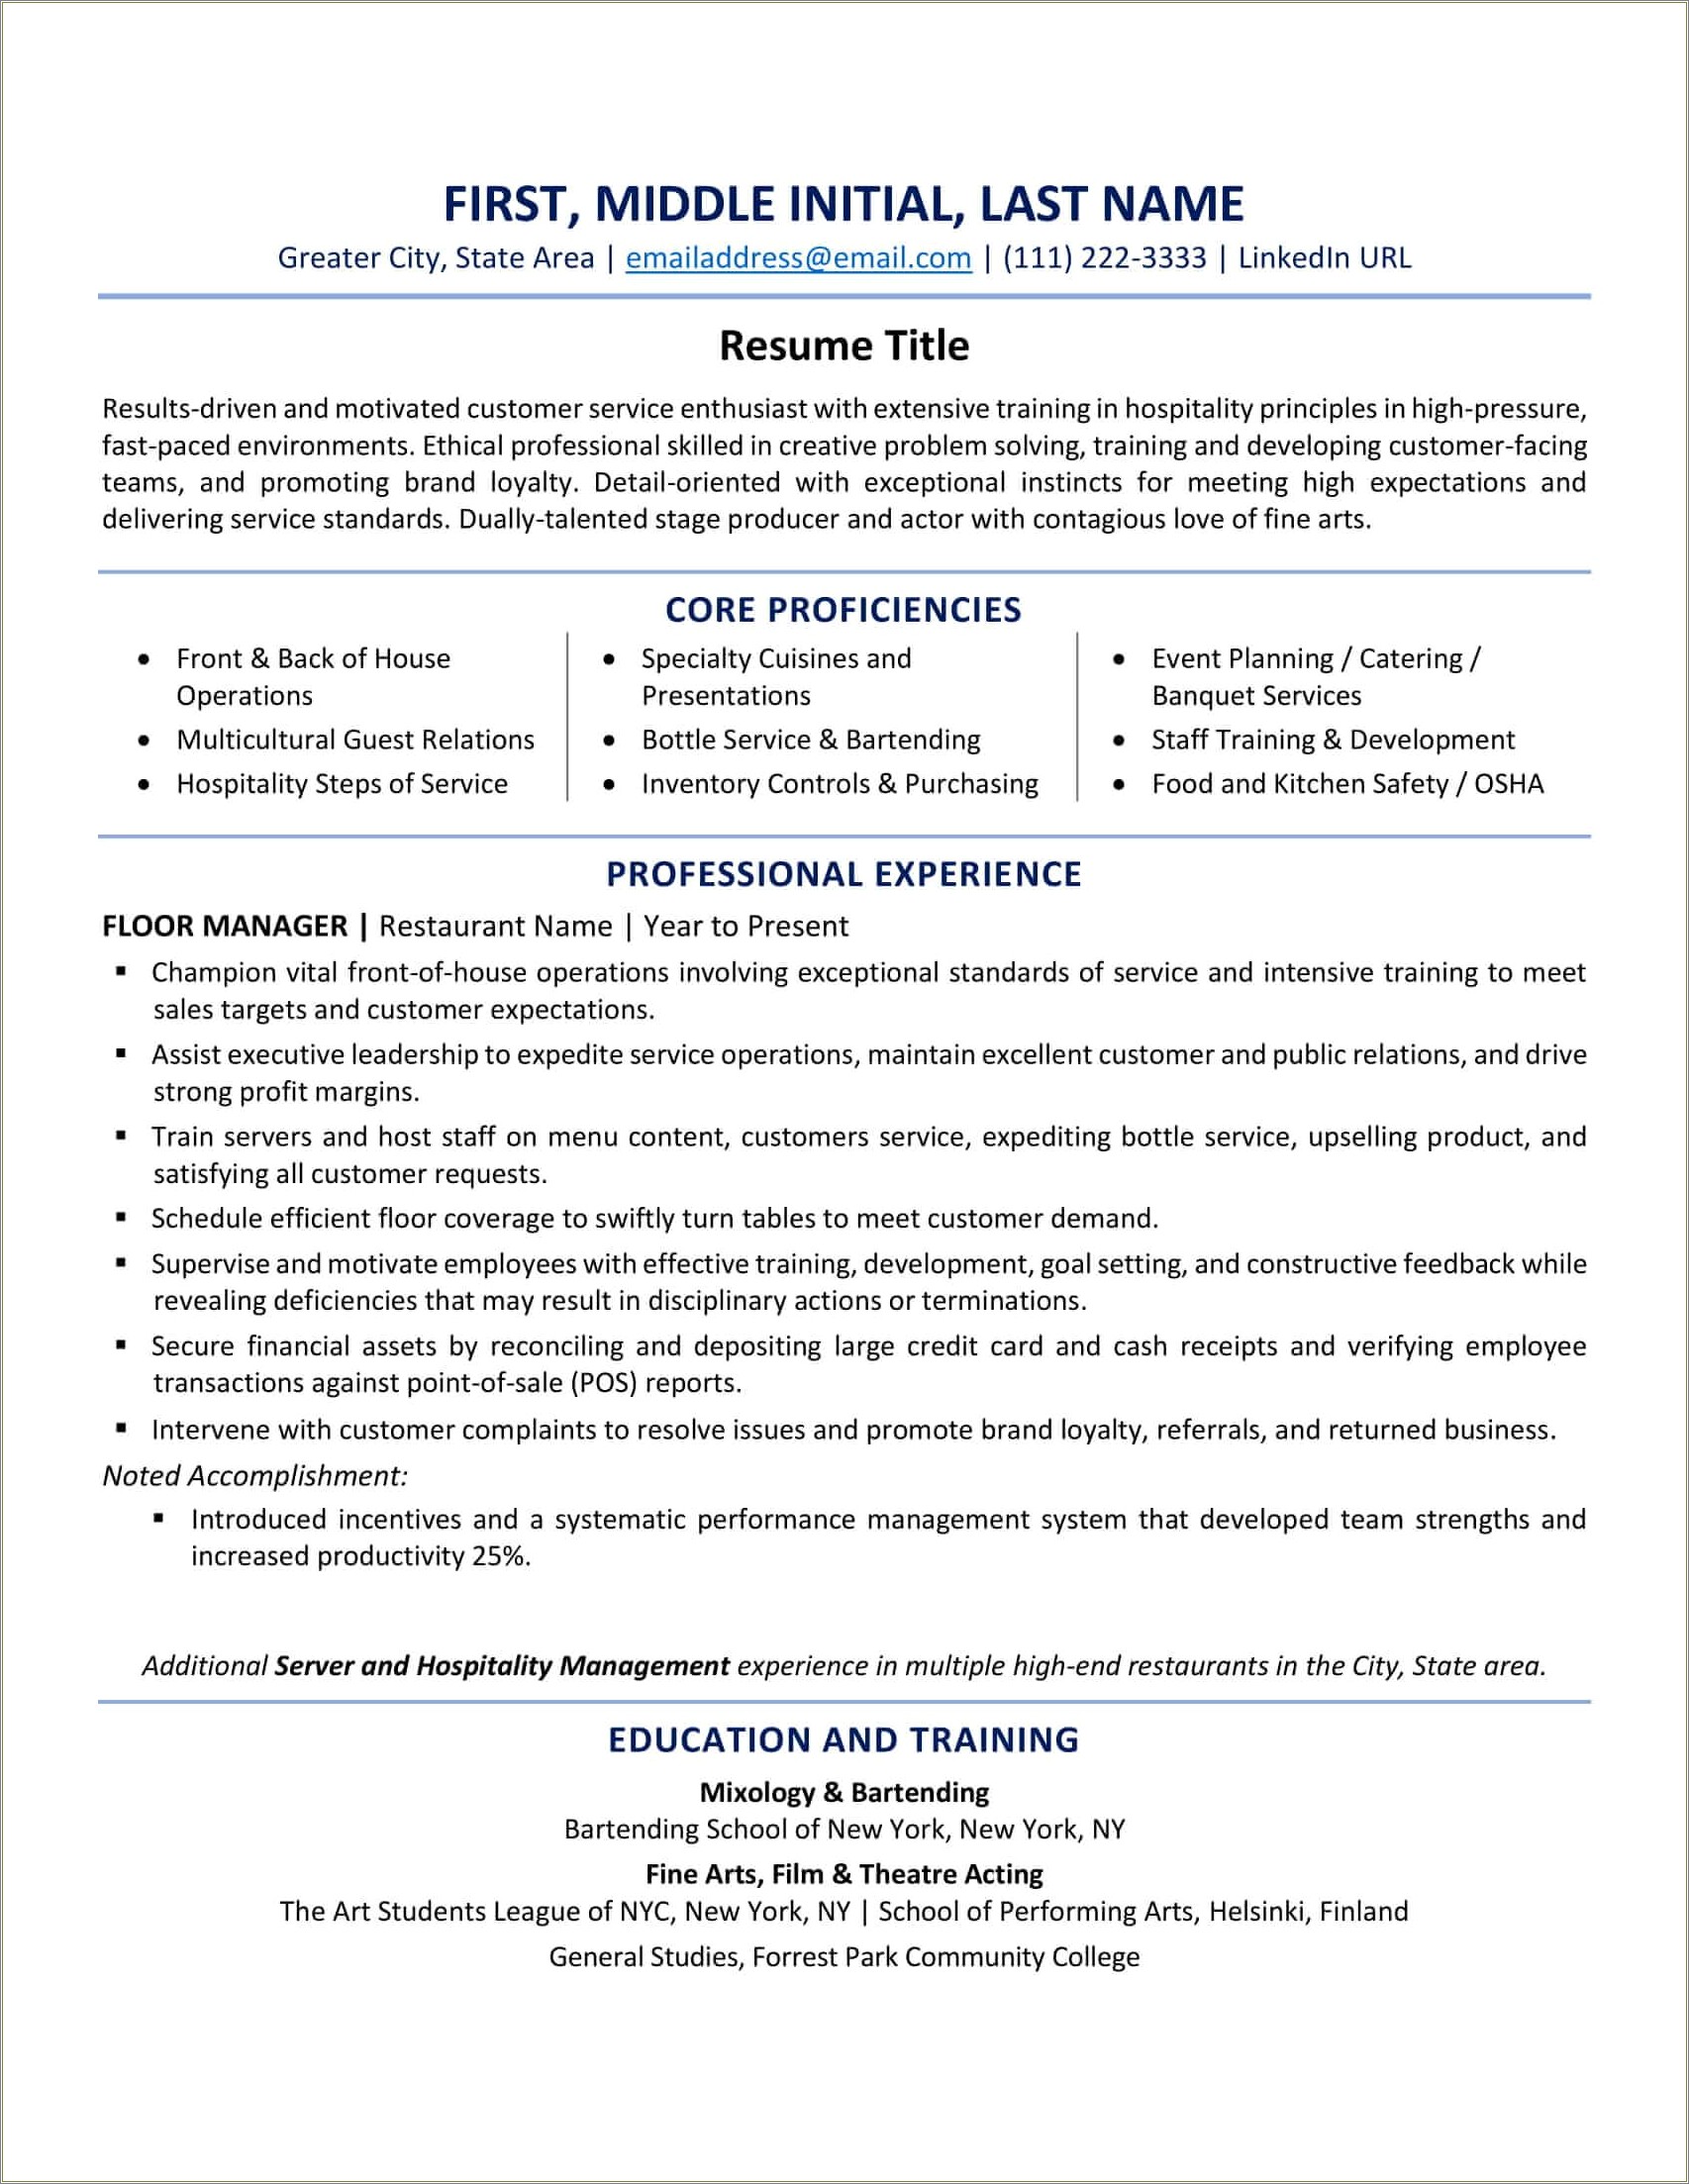 Resume Template For An Inventory Control Person